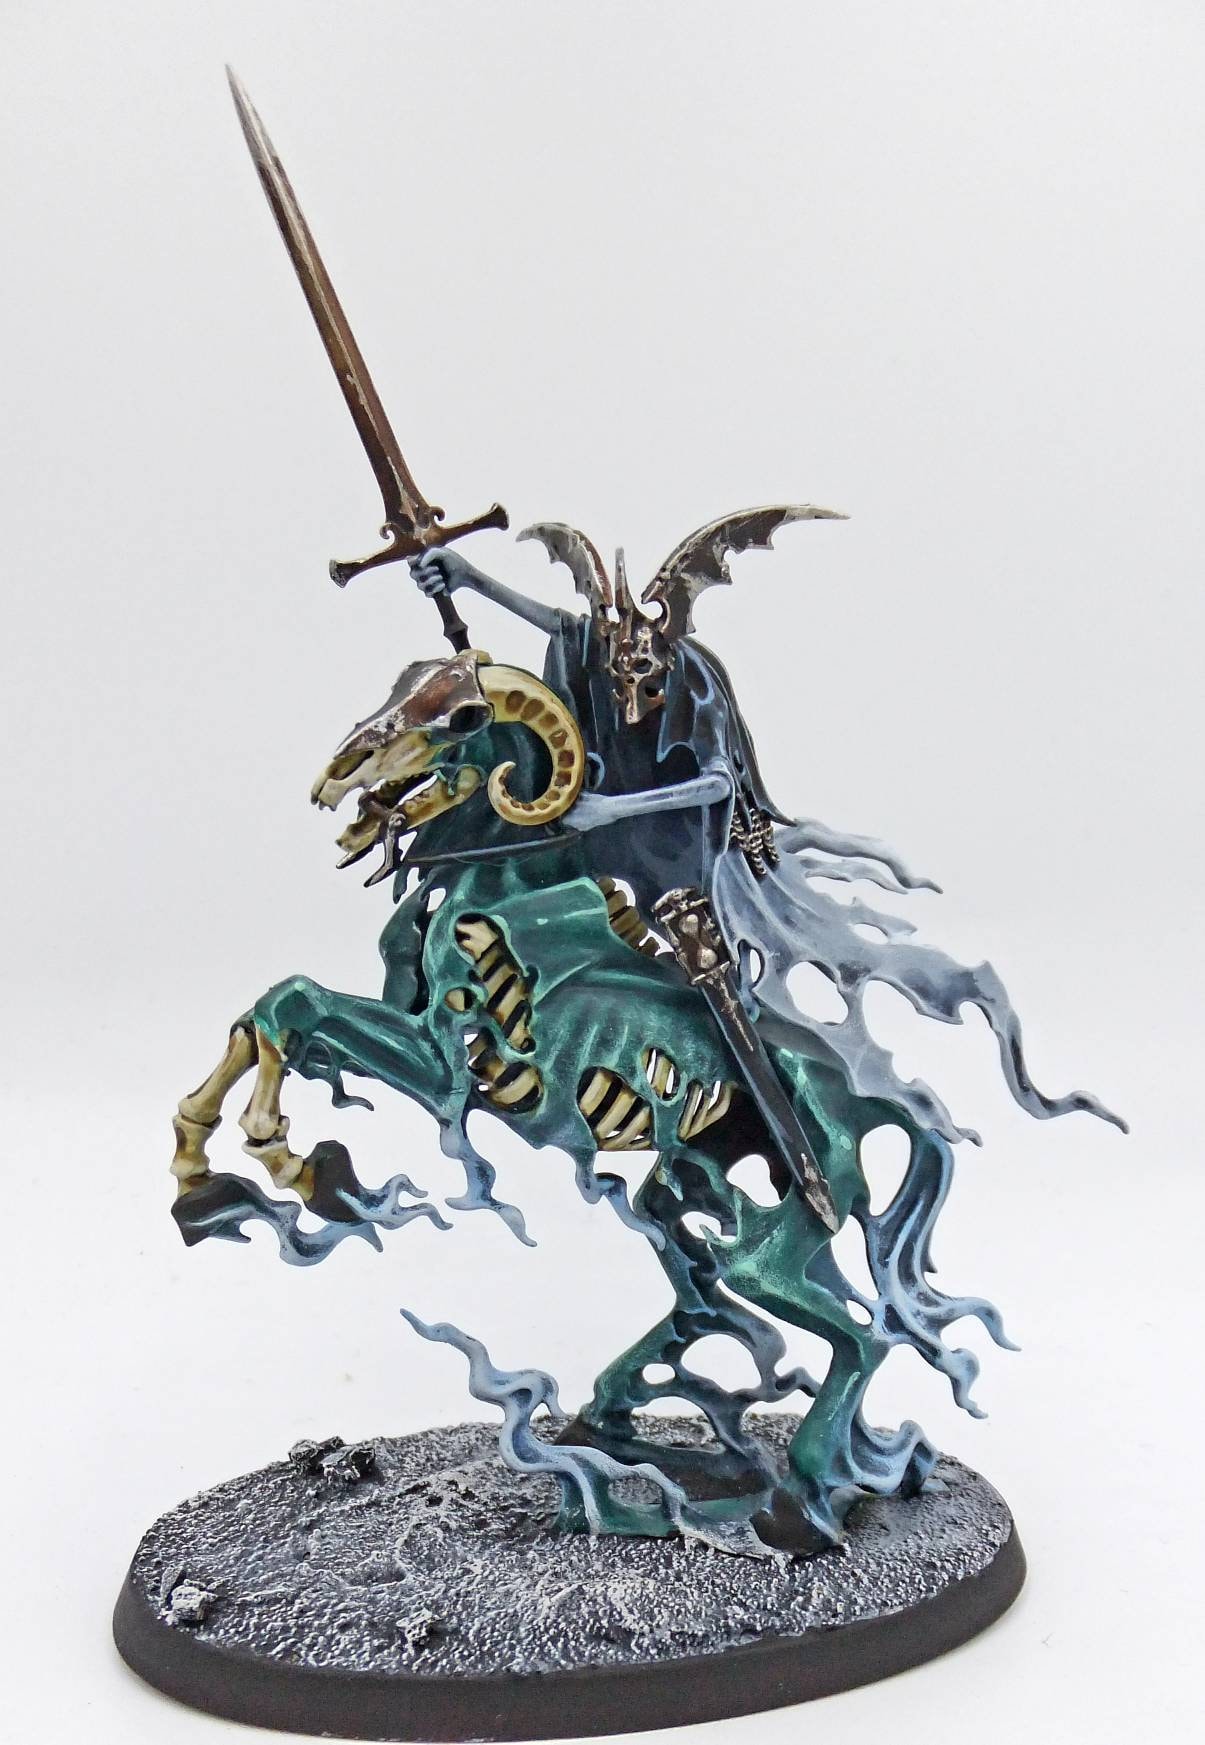 Knight of Shrouds Ethereal Steed Nighthaunt Soul Wars Warhammer Age of Sigmar